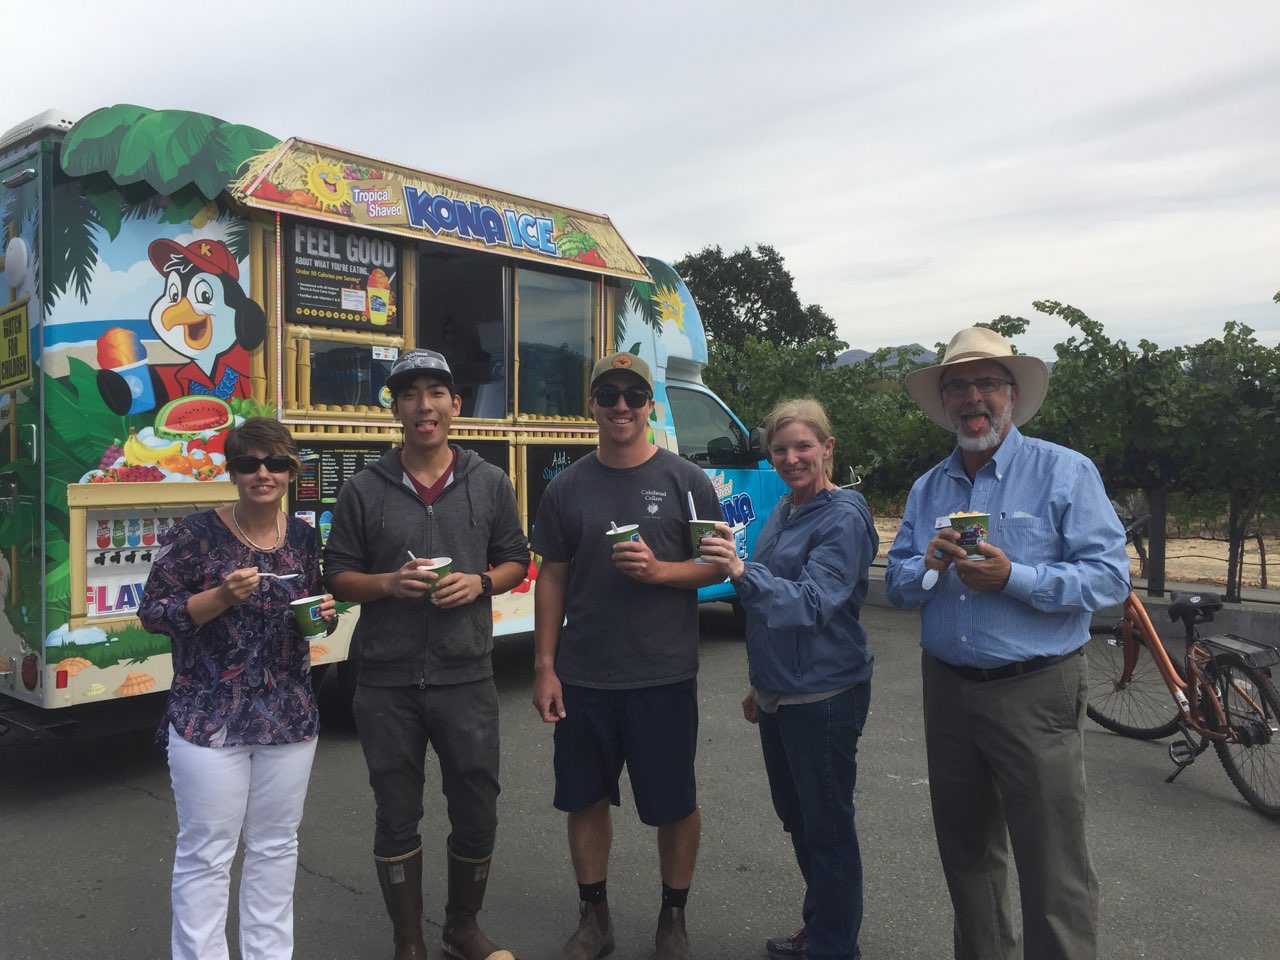 Employees enjoying a little Kona Ice on a hot day during Harvest at the winery for Employee Appreciation Week!